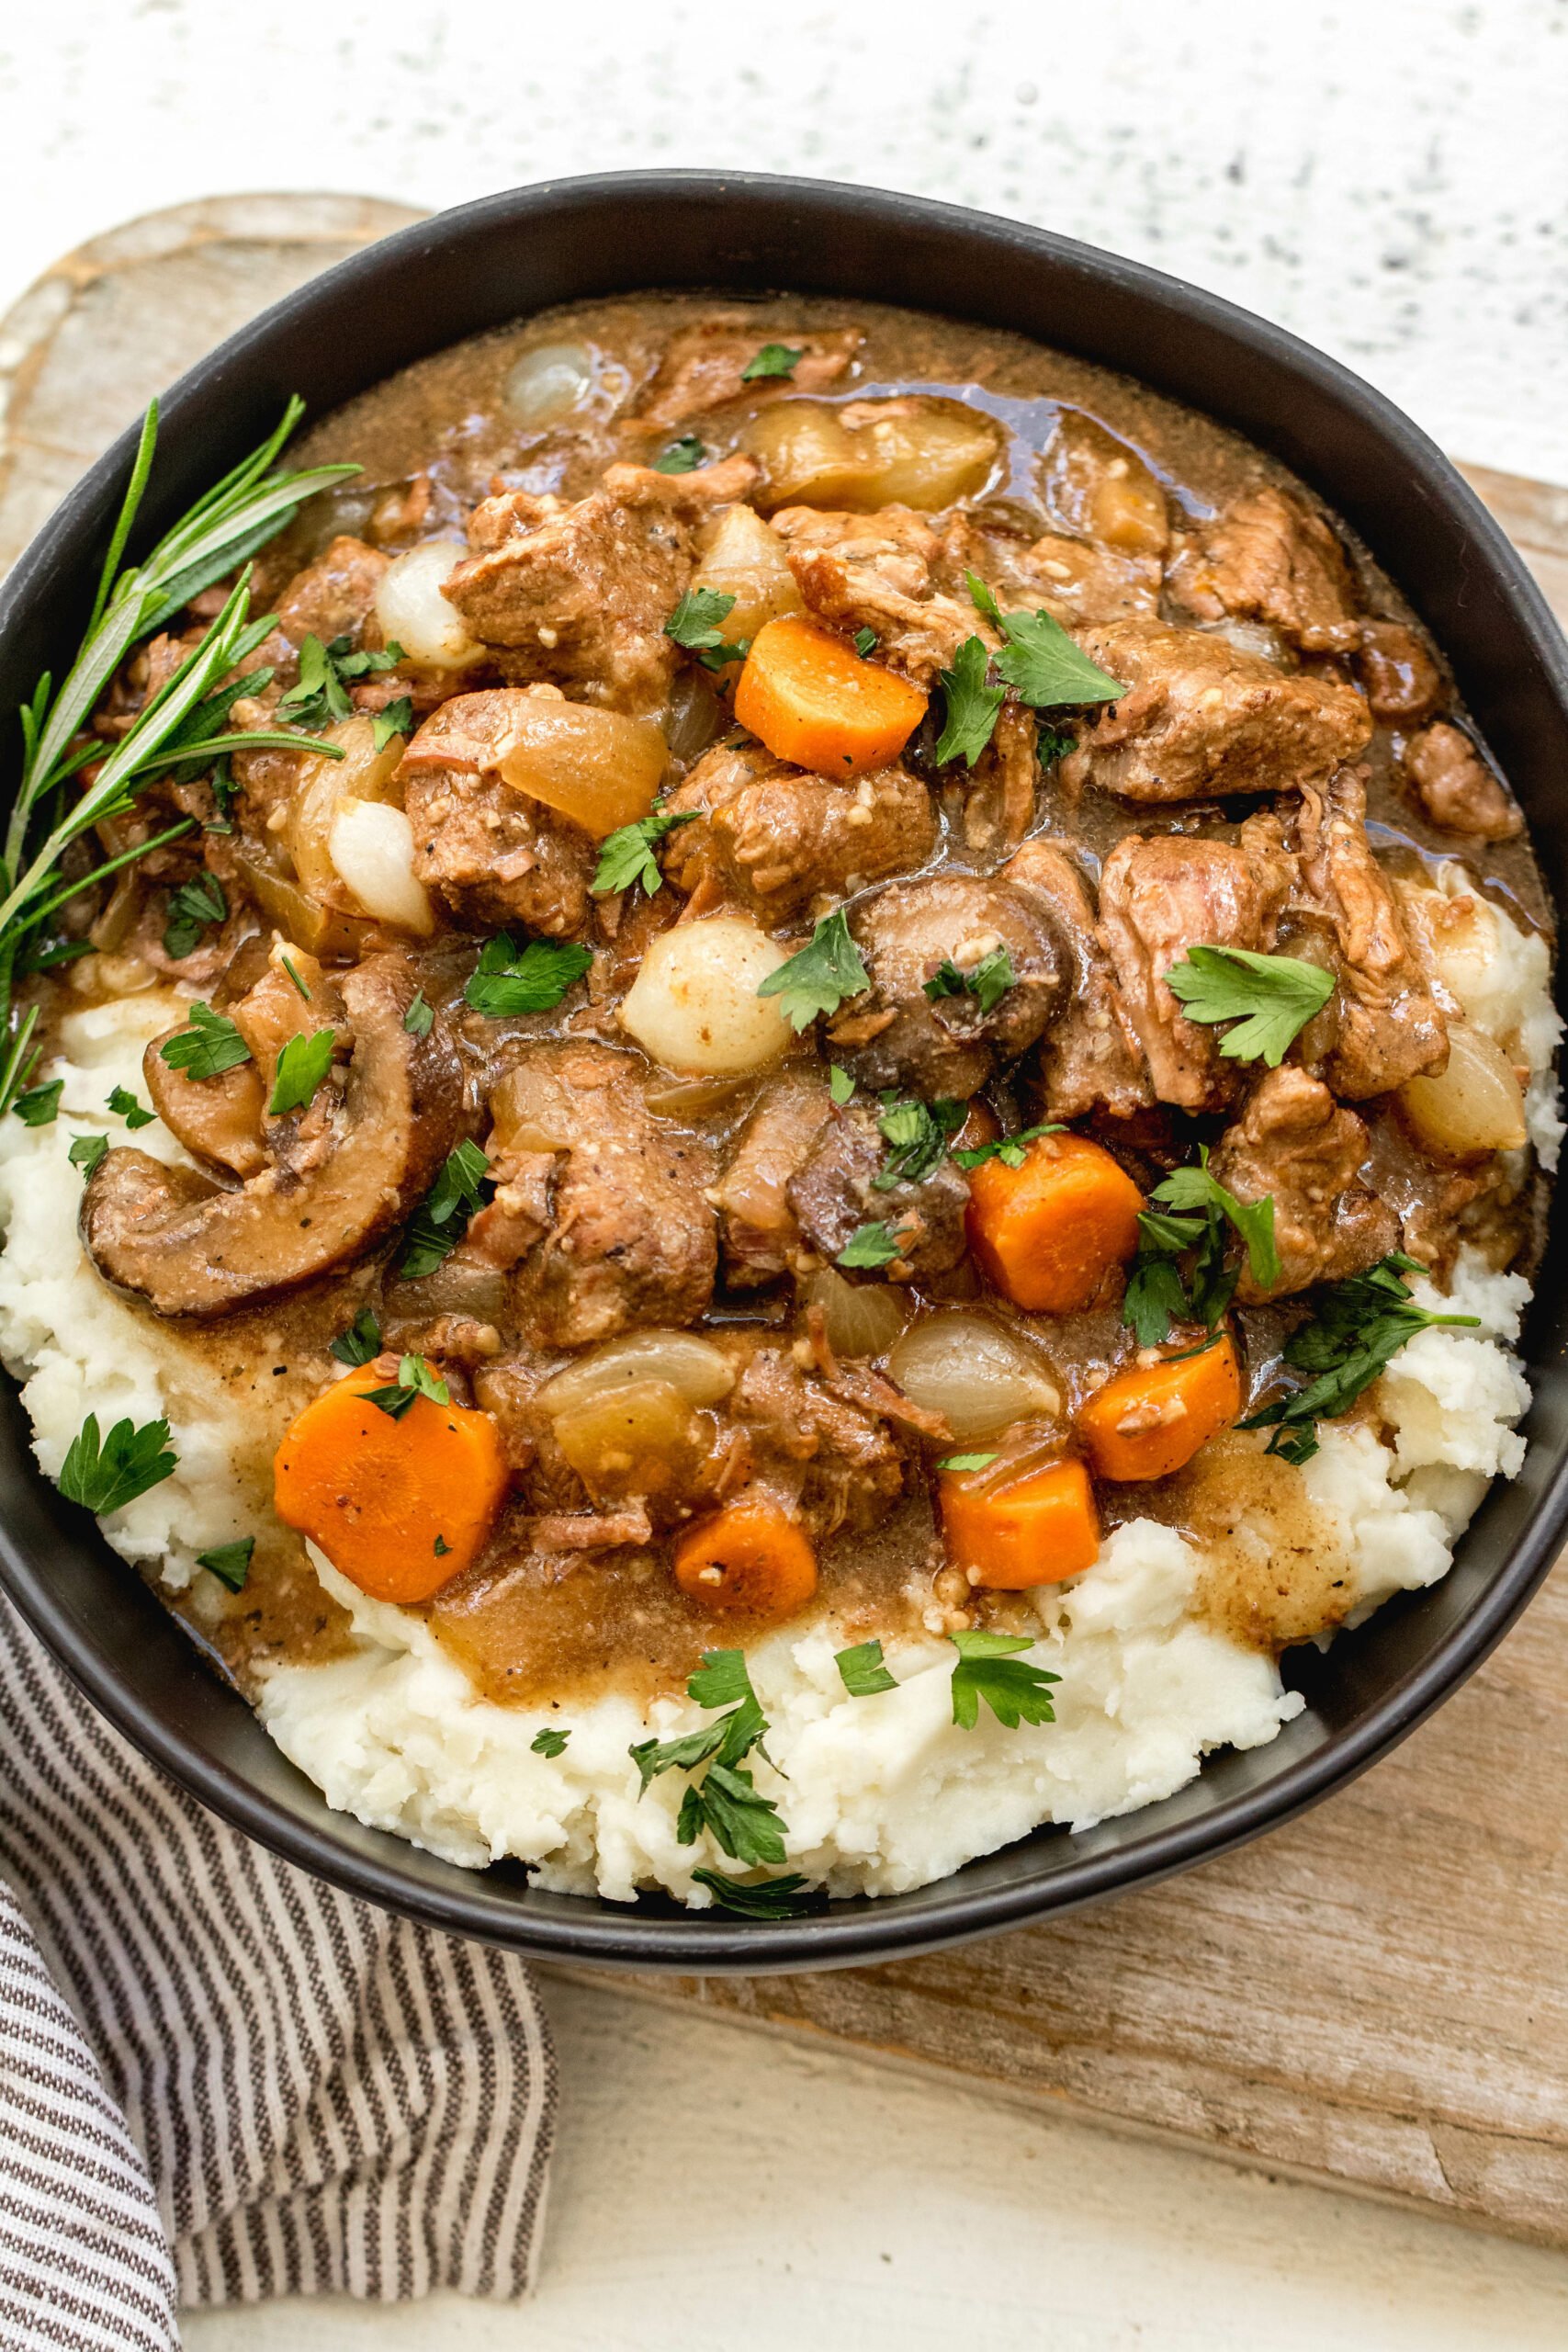 This Whole30 slow cooker beef bourguignon is an easy set it and forget recipe. It's paleo, gluten-free and dairy-free, full of vegetables and rich in flavor. Beef bourguignon in the crockpot is made with stew meat, and is ideal for a simple weeknight dinner or meal prep recipe to use for lunches. It's also freezer friendly, and this Whole30 beef recipe is sure to be a family favorite! #whole30slowcooker #whole30beef